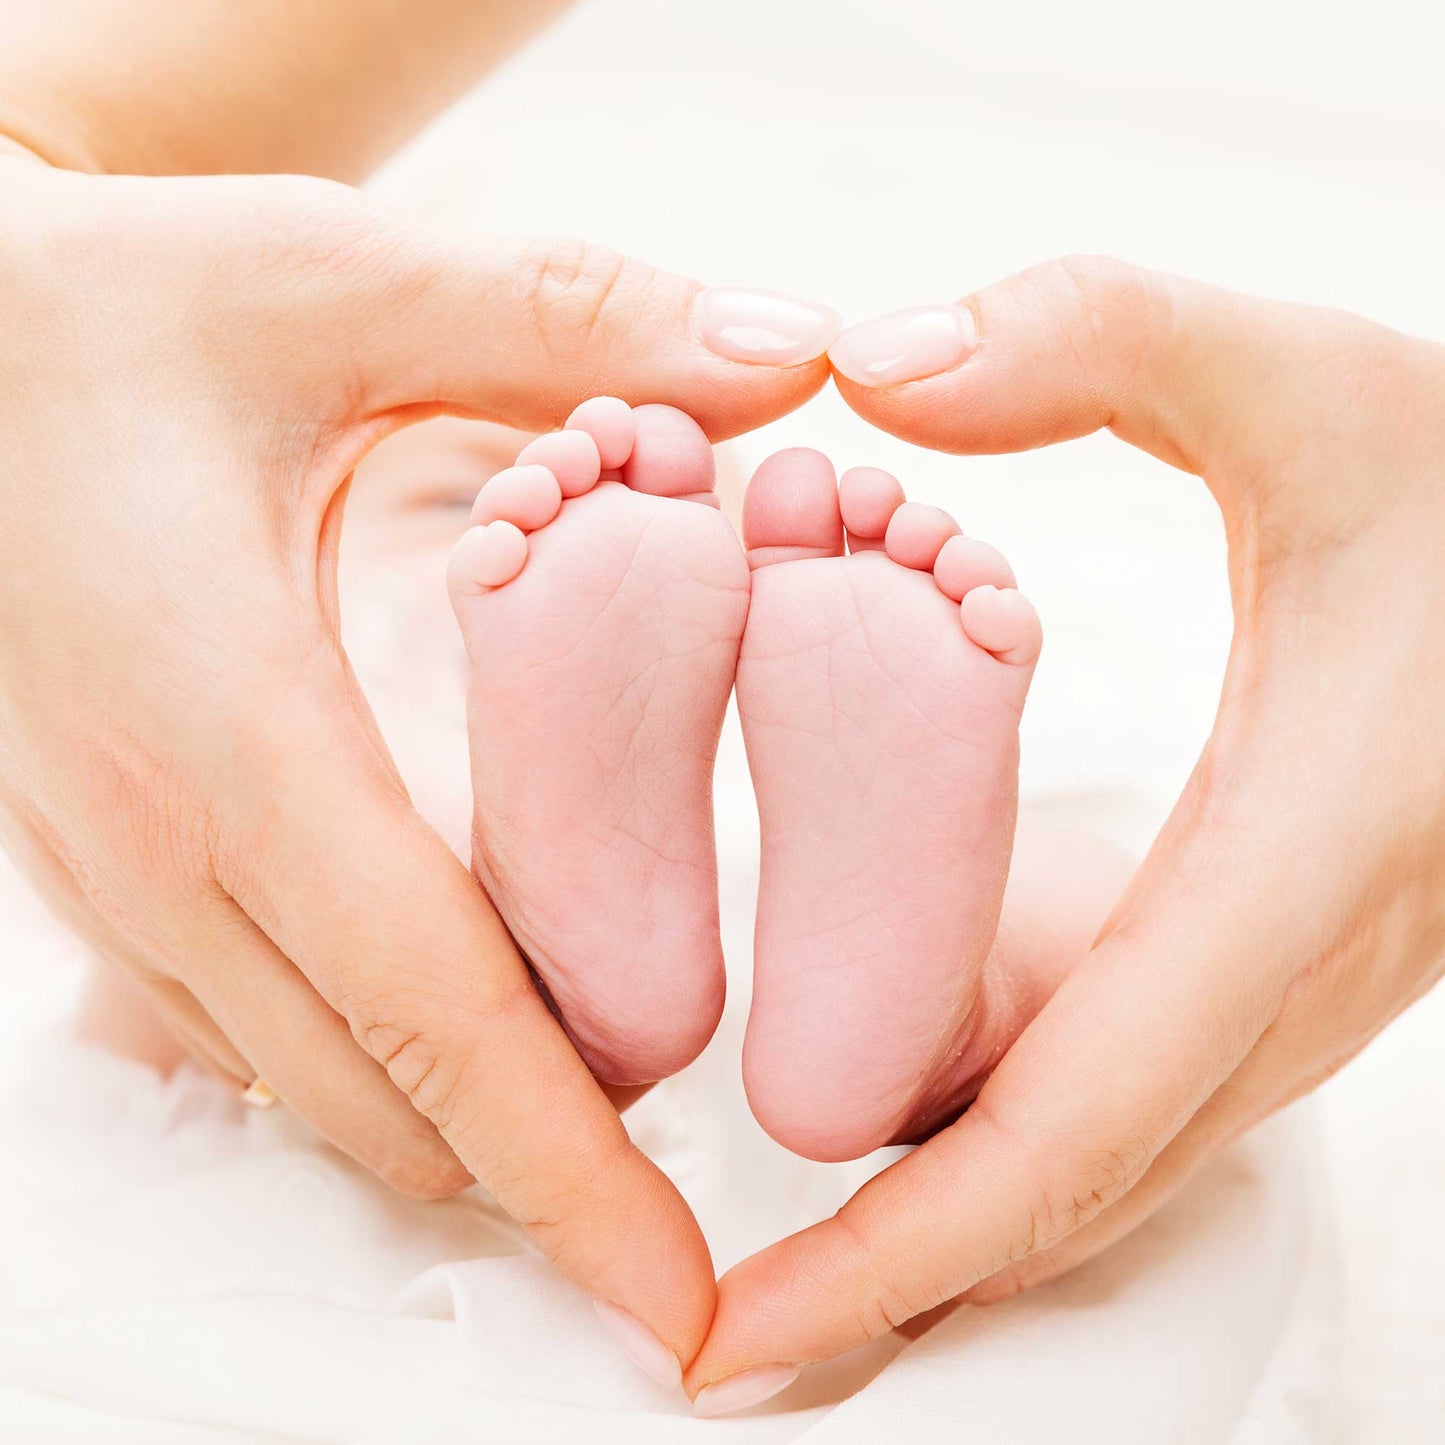 Endless Love from the Womb: A Promise of Bonding